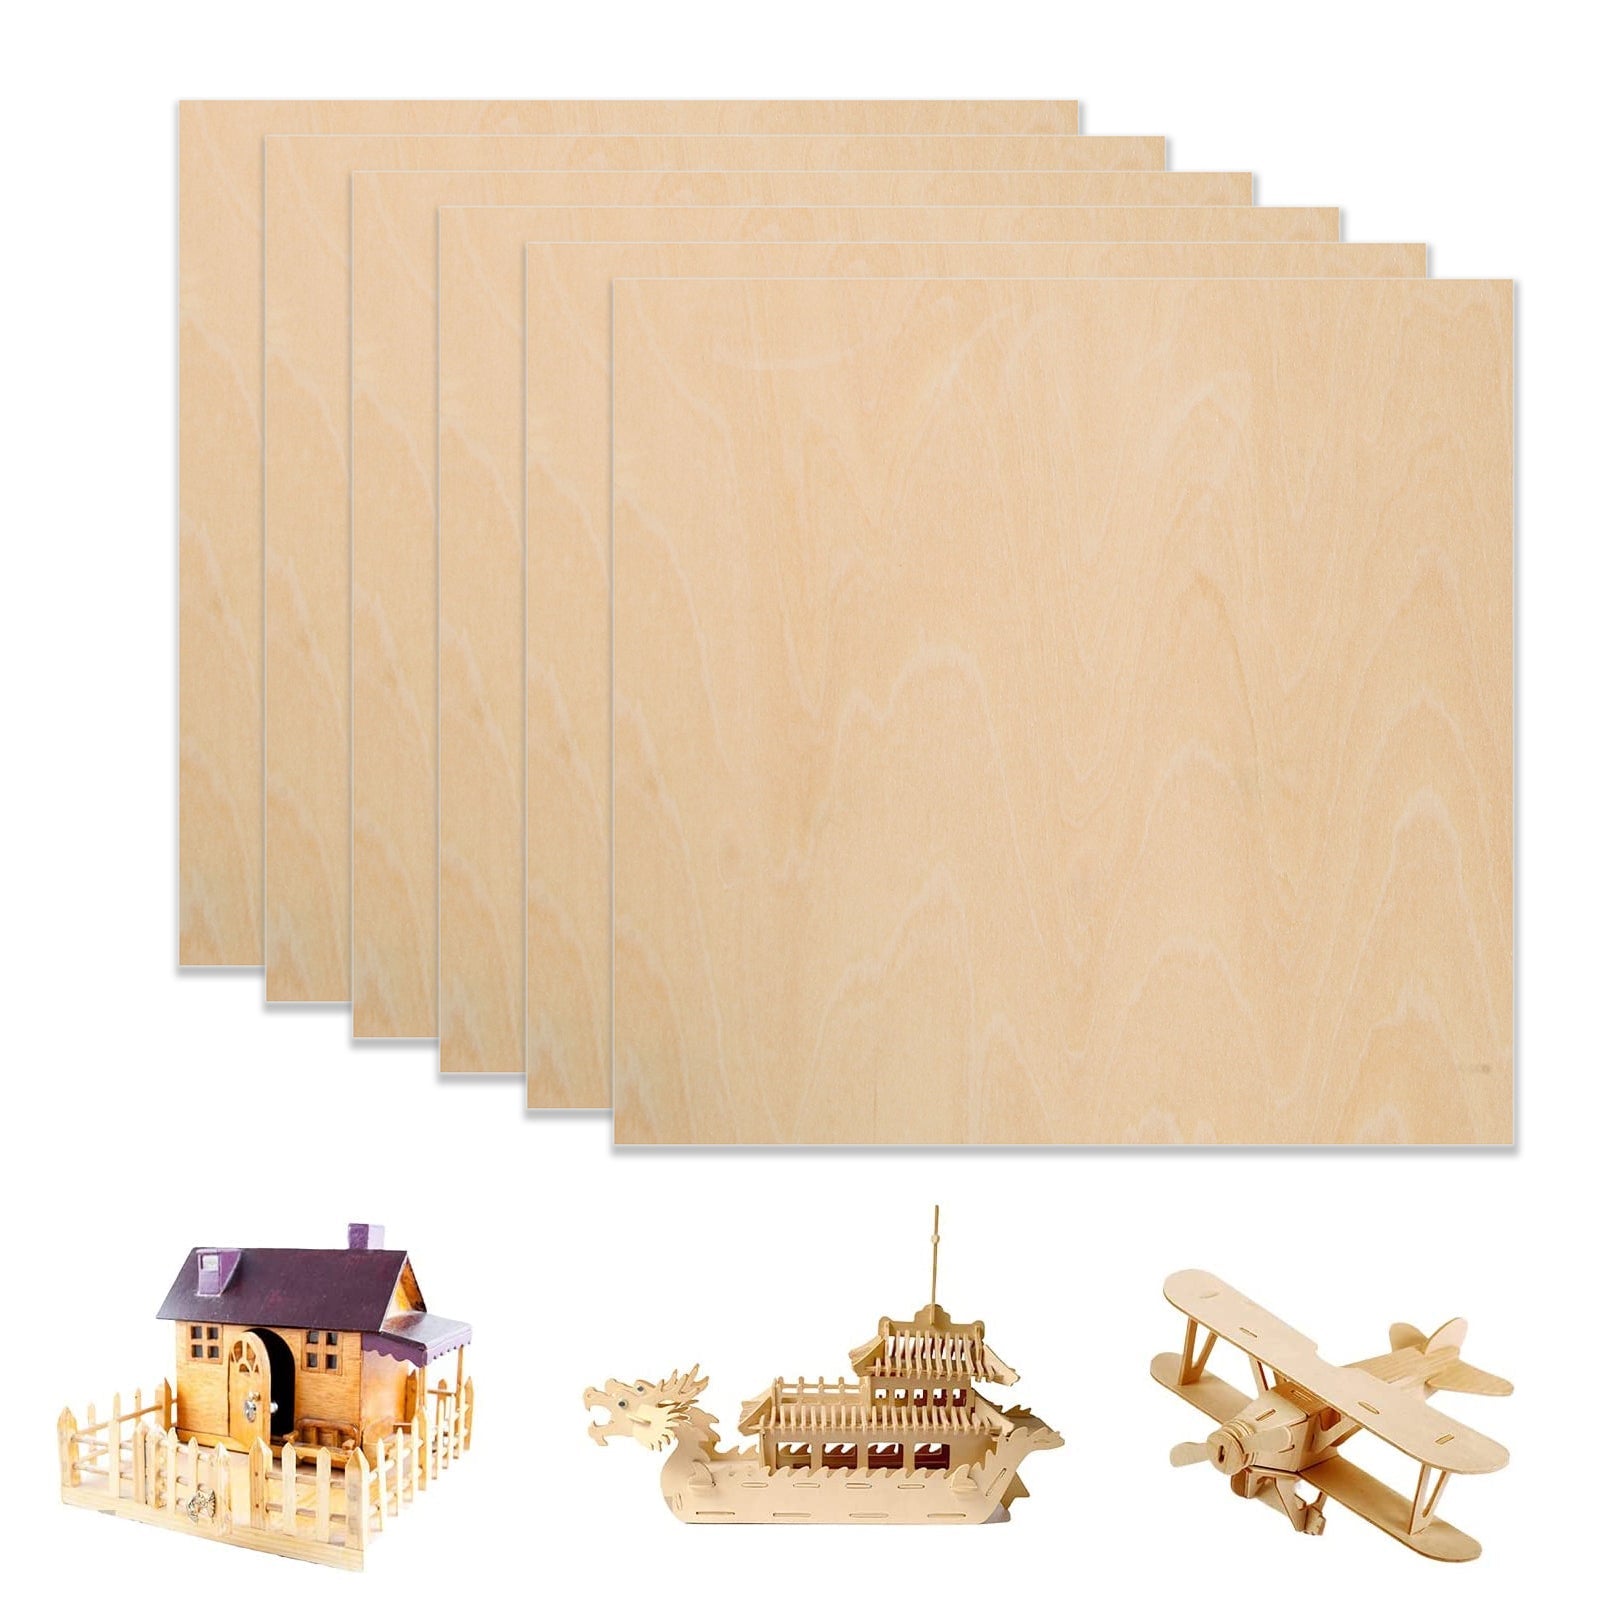 A4 Plywood Sheets 3mm Thickness (+/- 0.2mm) Basswood Plywood 11.8x11.8 inch for Engraving - CREATORALLY